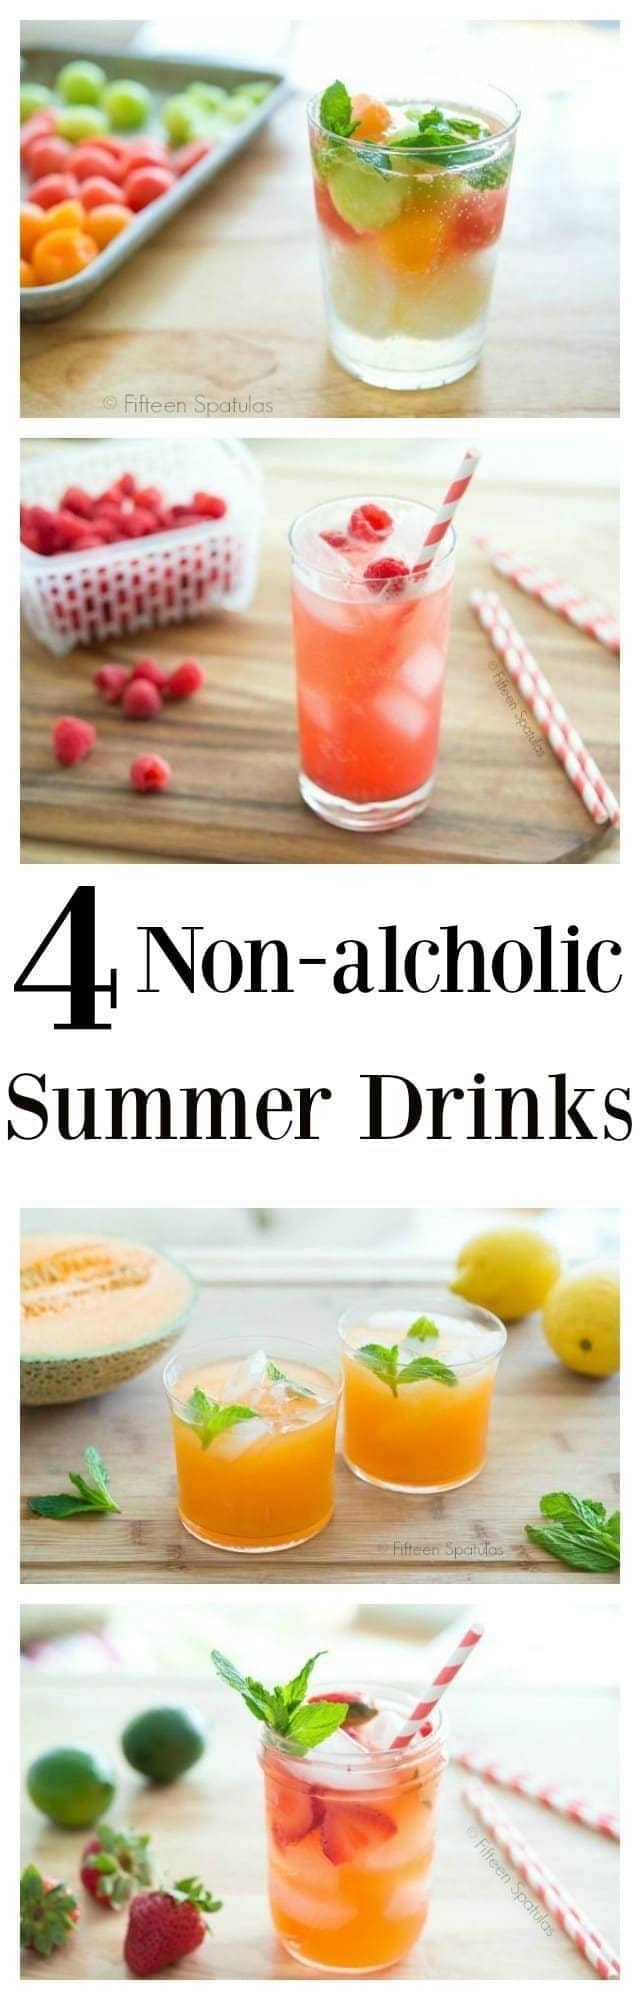 Refreshing Drinks - 4 different recipes in photo collage